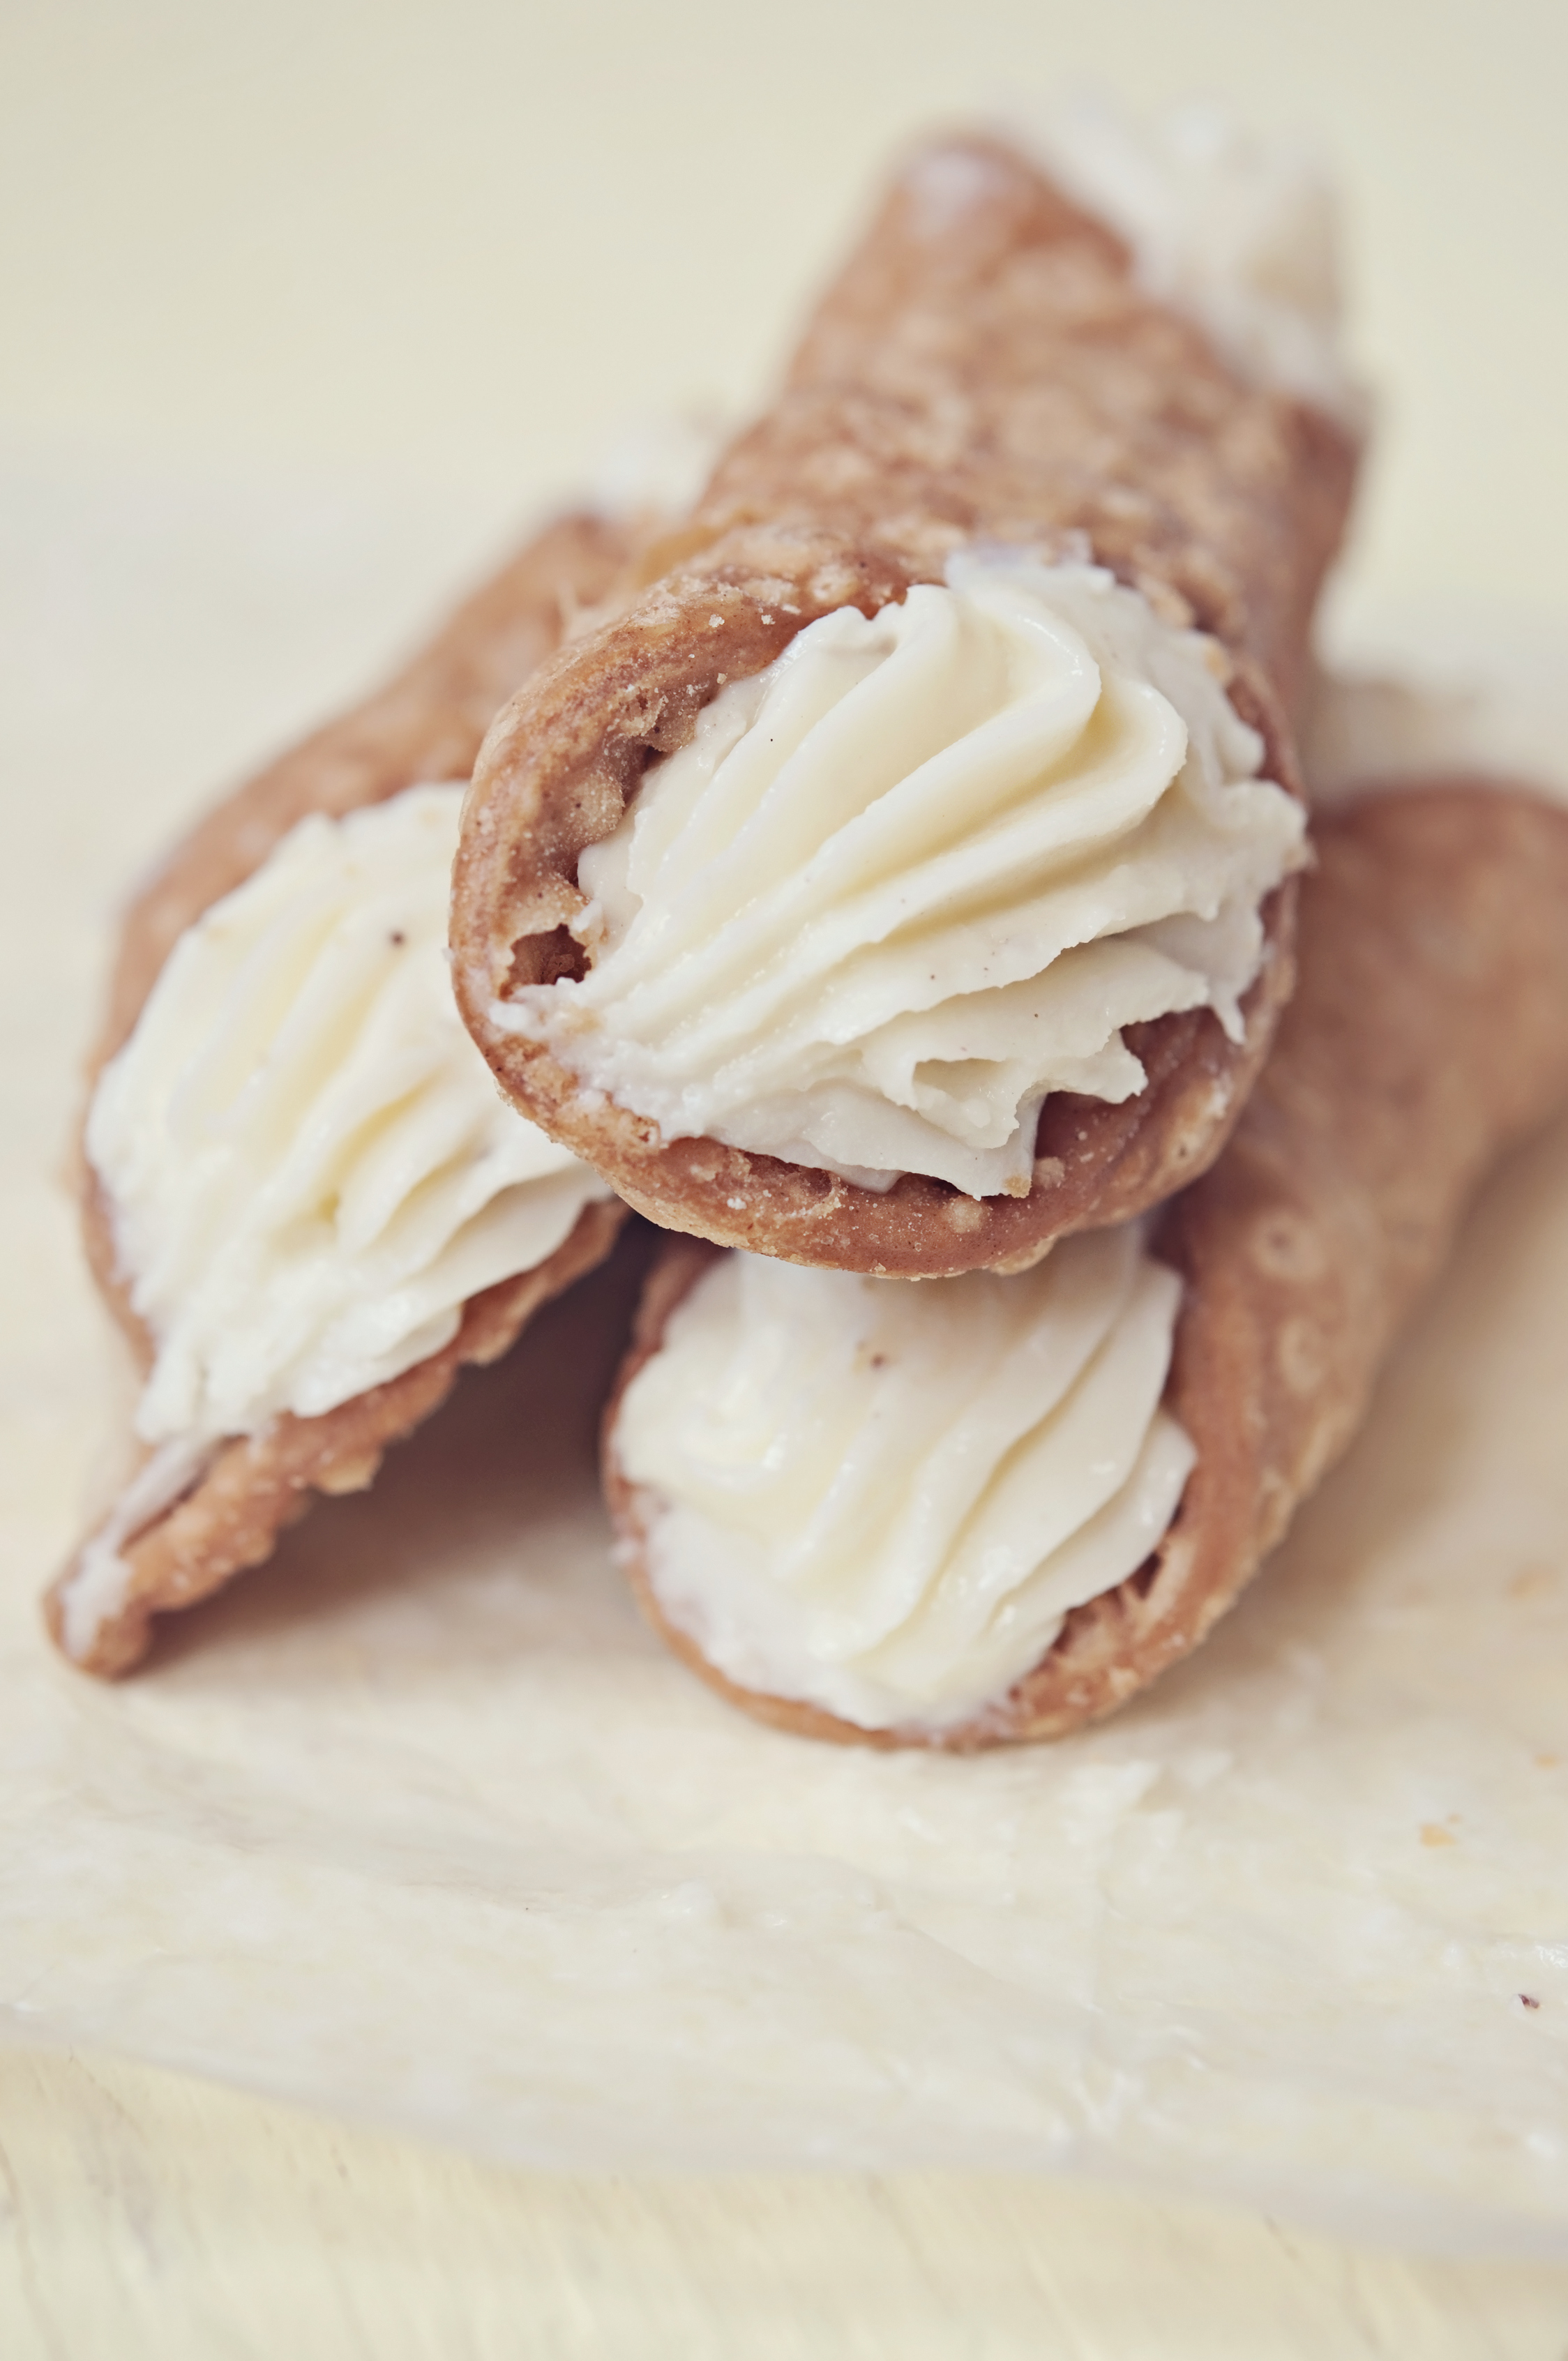 These are cannoli, they are not astronauts